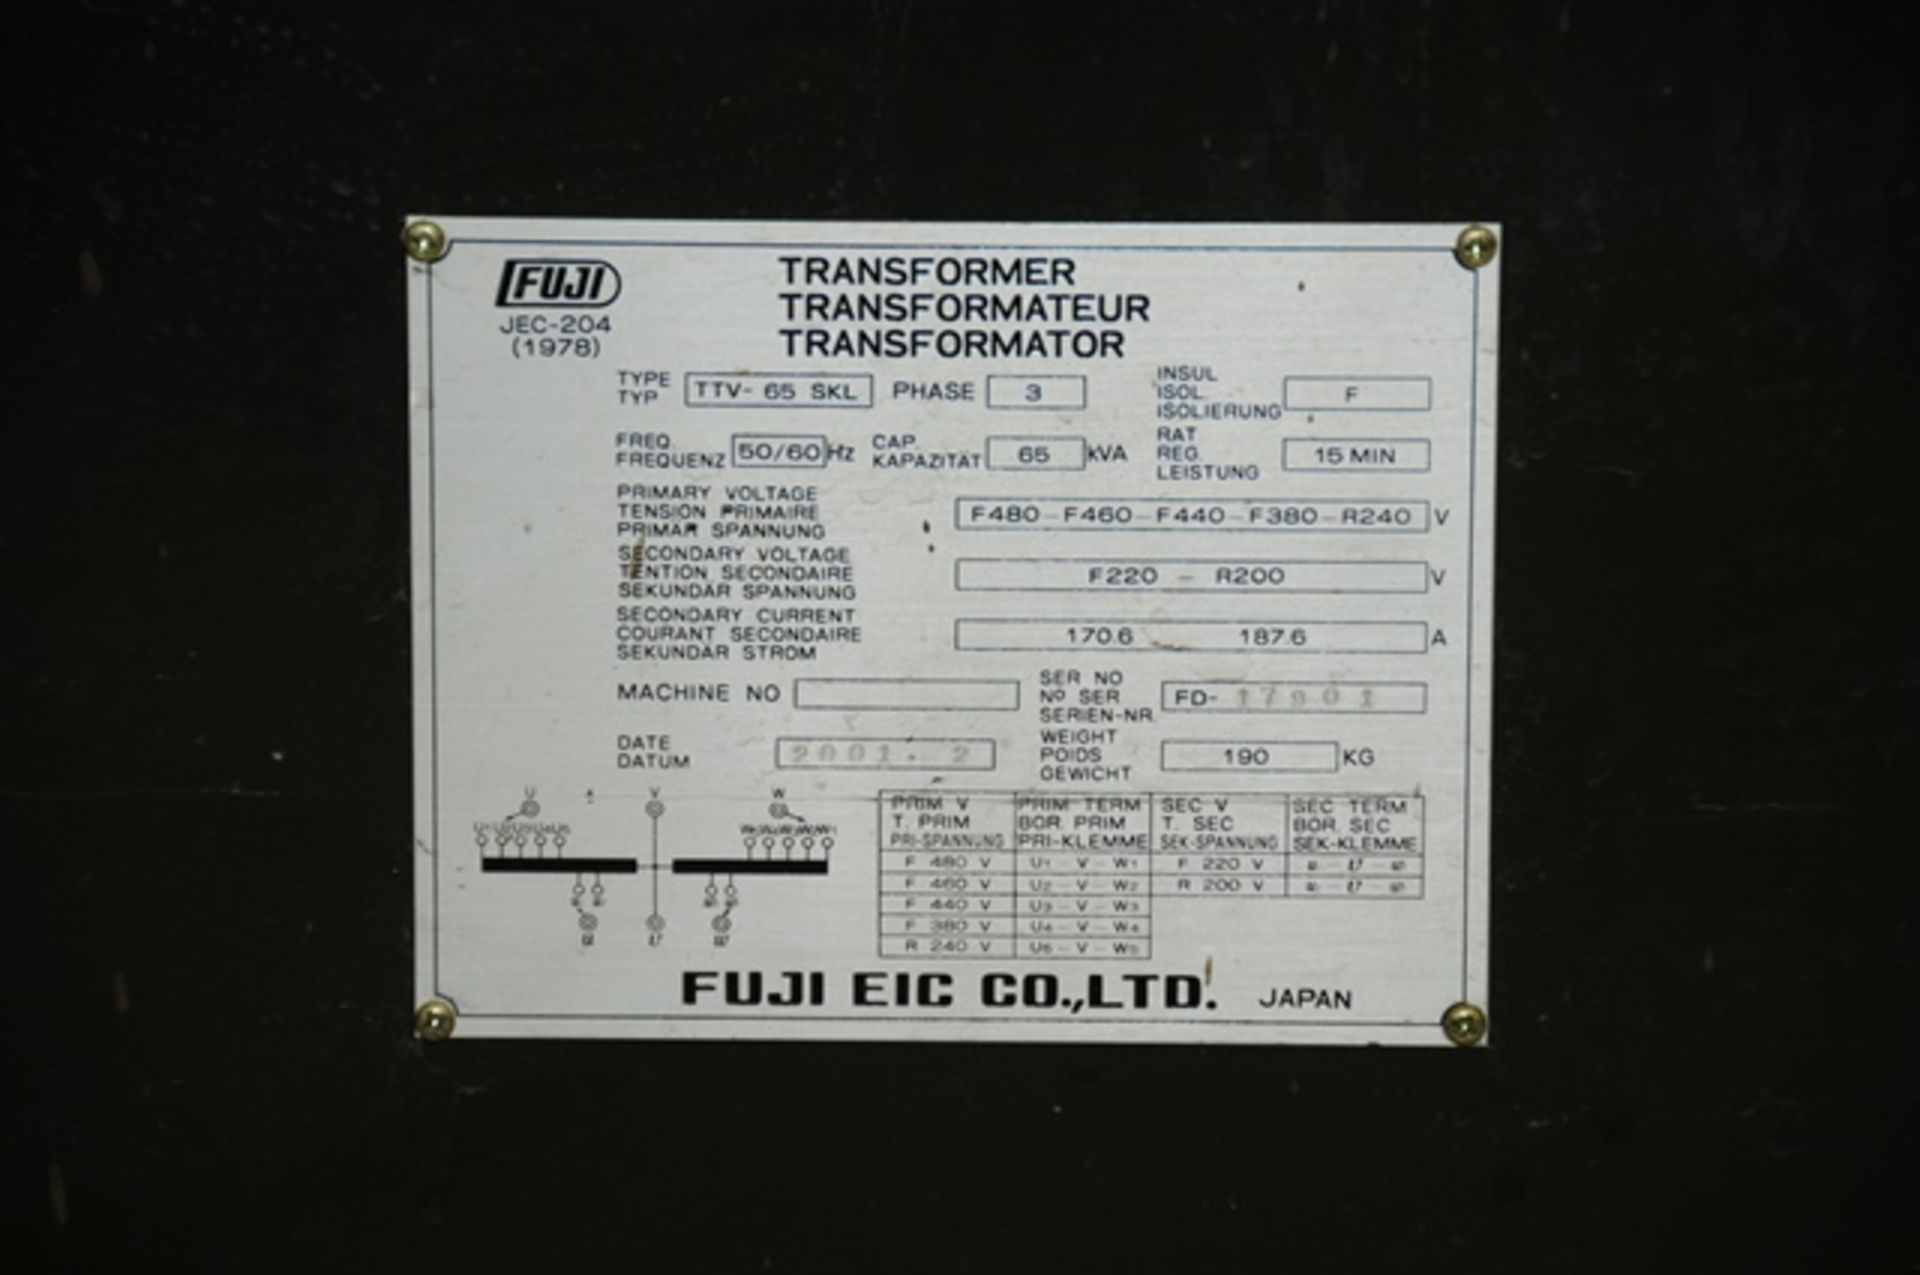 Fuji - 65 KVA Transformer17901 Name plate Location 1708 Nichol Ave Anderson Indiana Packaging - Image 2 of 2